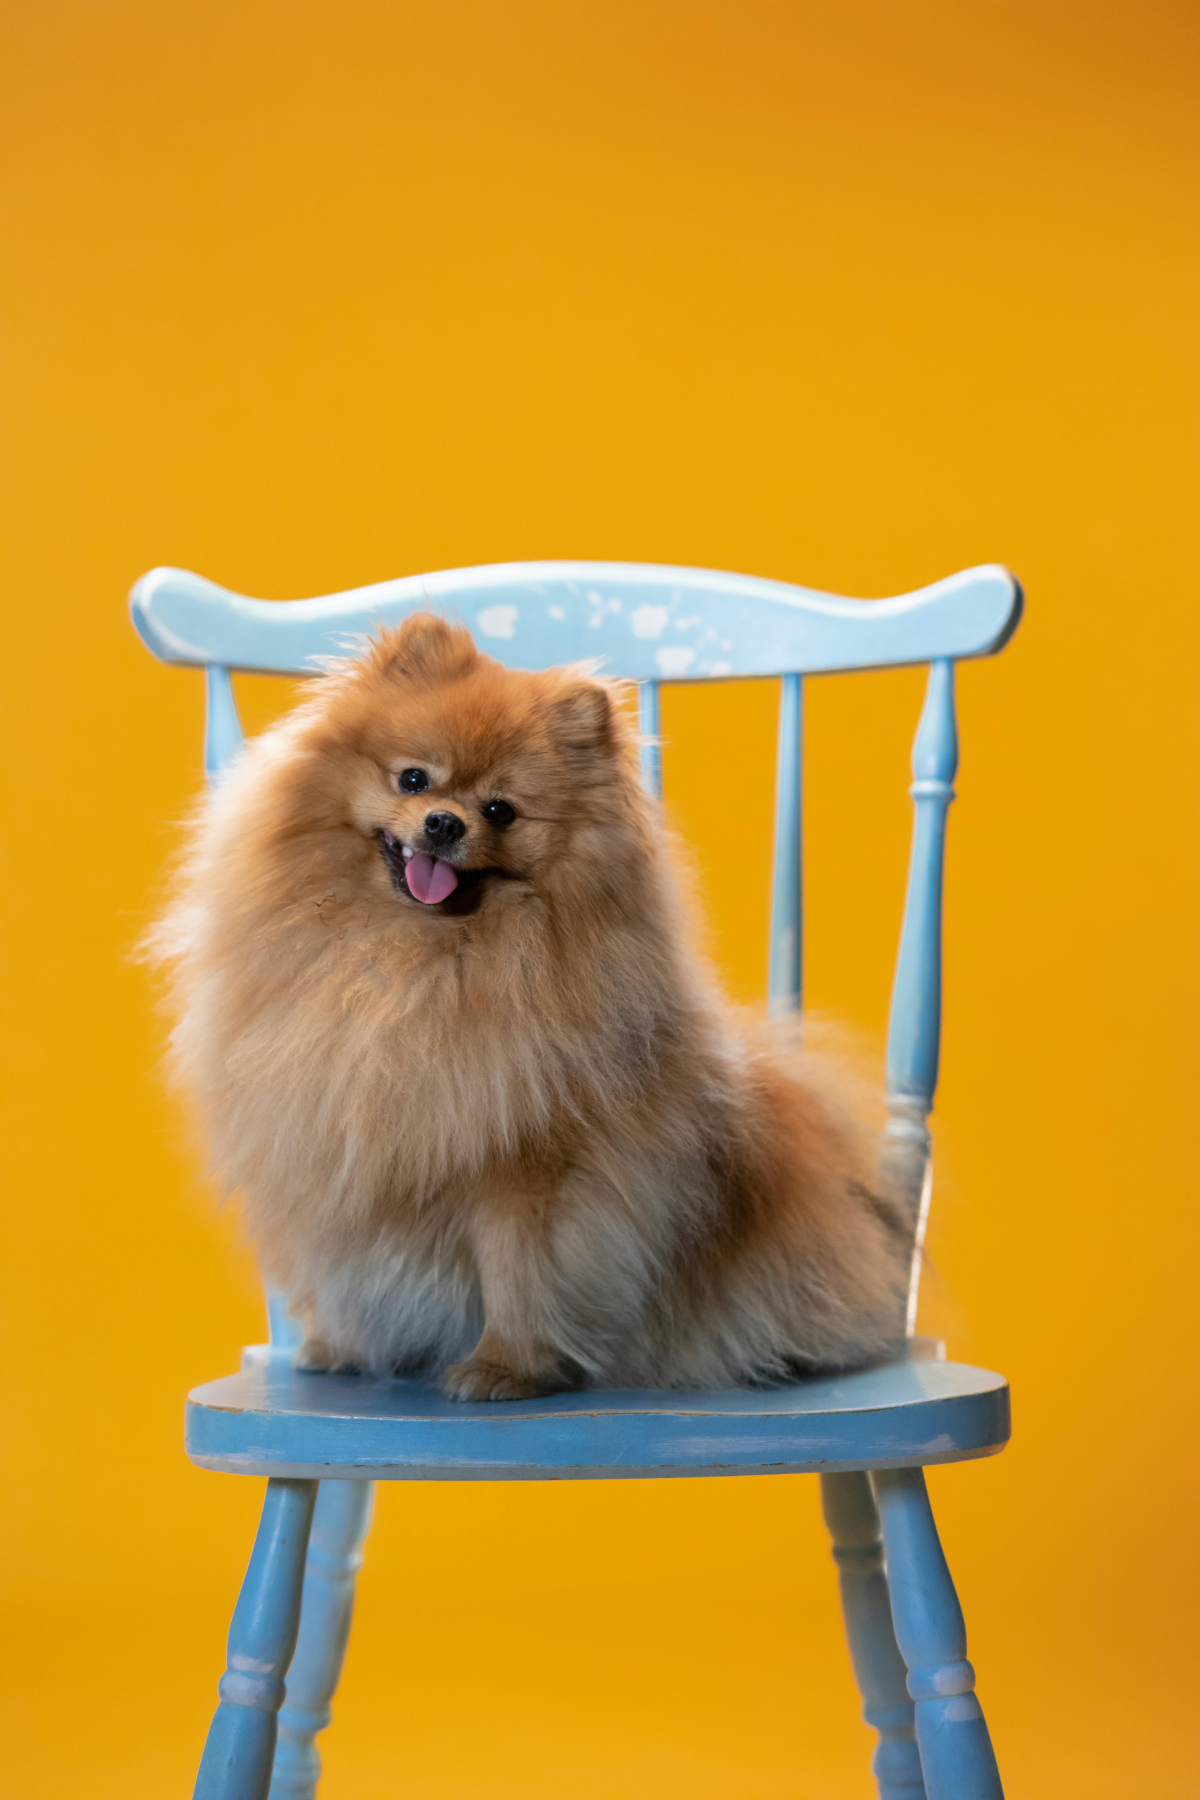 Are Pomeranians Hypoallergenic? Answering 7 Common Questions